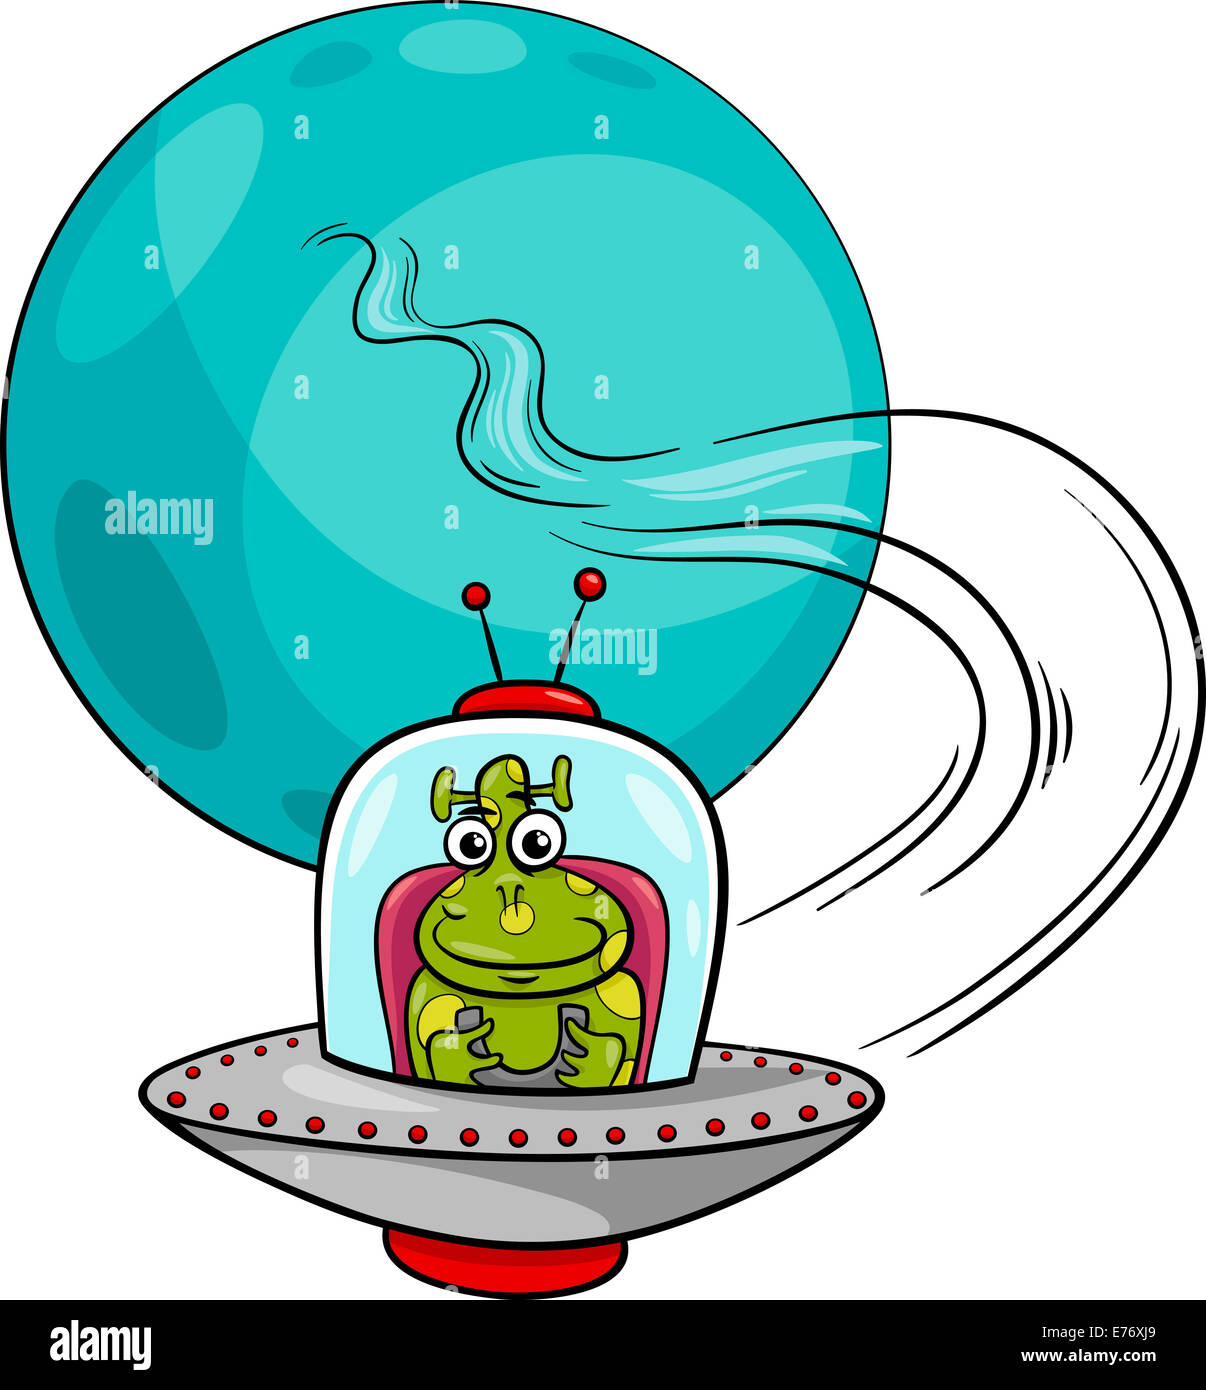 Cartoon Illustration of Funny Alien or Martian Comic Character in Ufo  Spaceship Stock Photo - Alamy